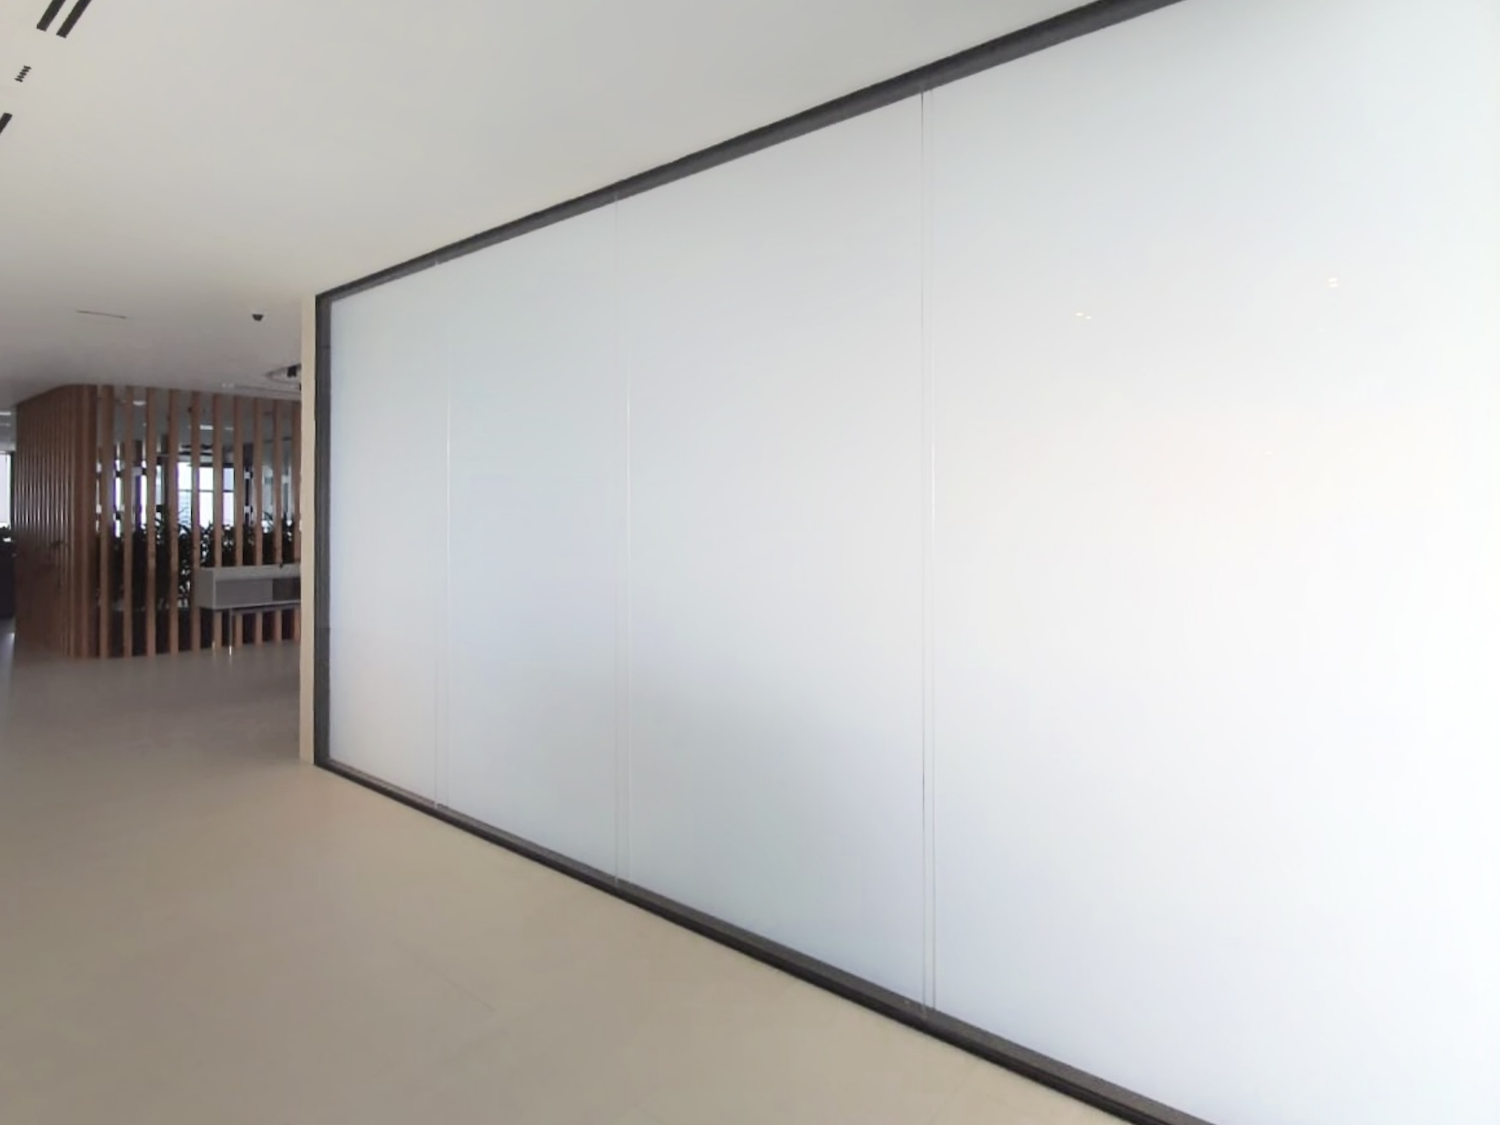 Explore Versatile Workspace Solutions with Switchable Glass